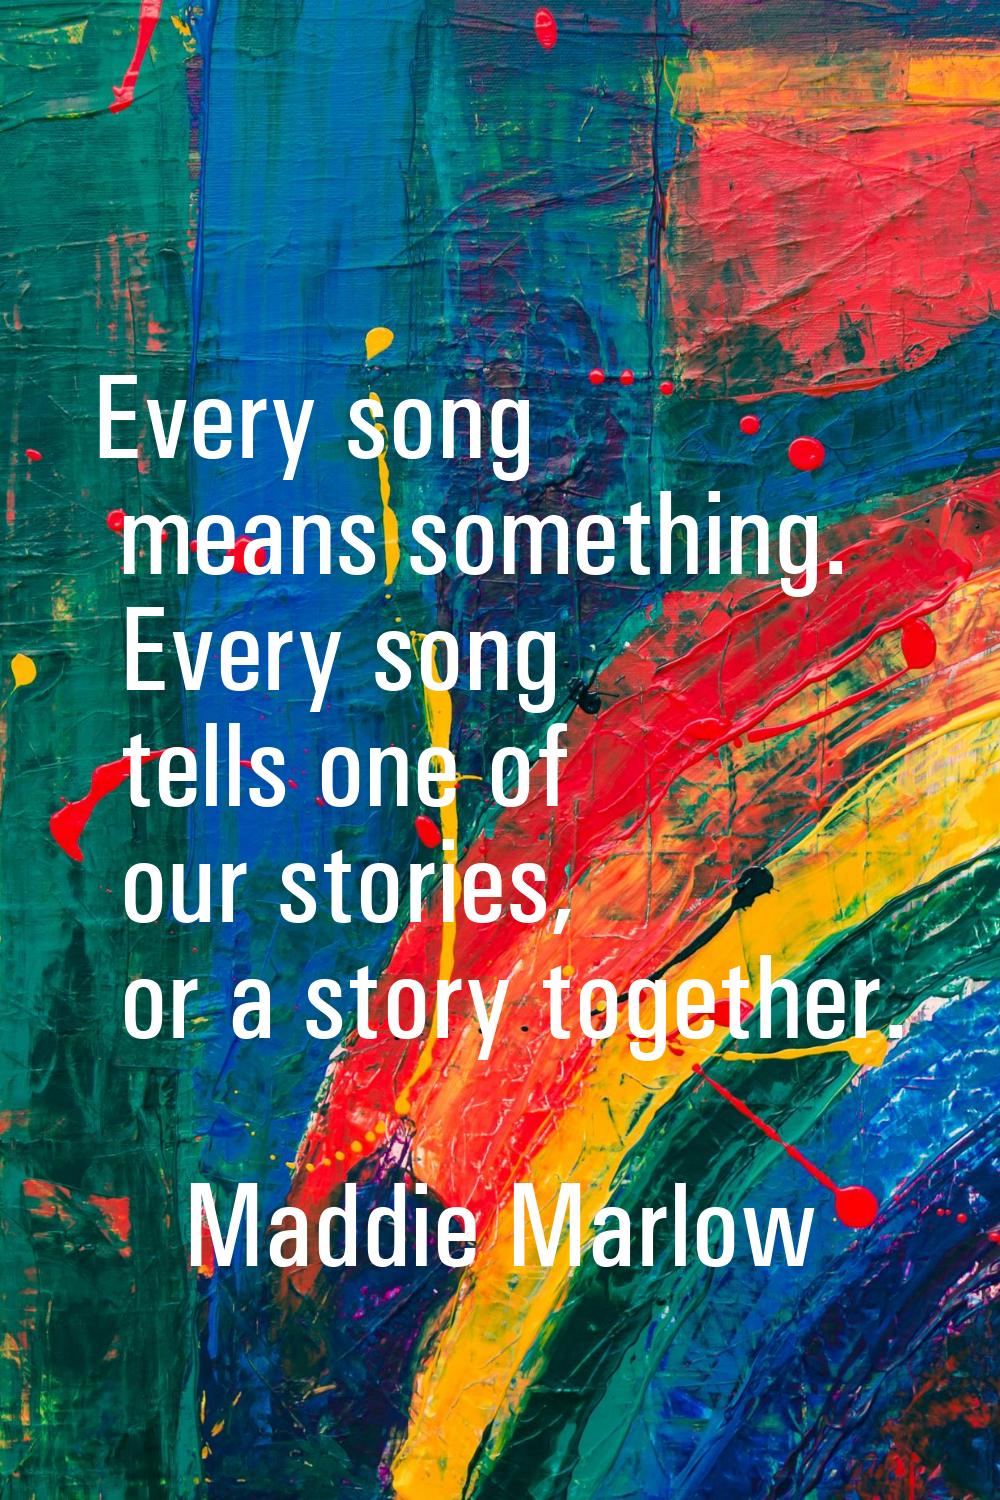 Every song means something. Every song tells one of our stories, or a story together.